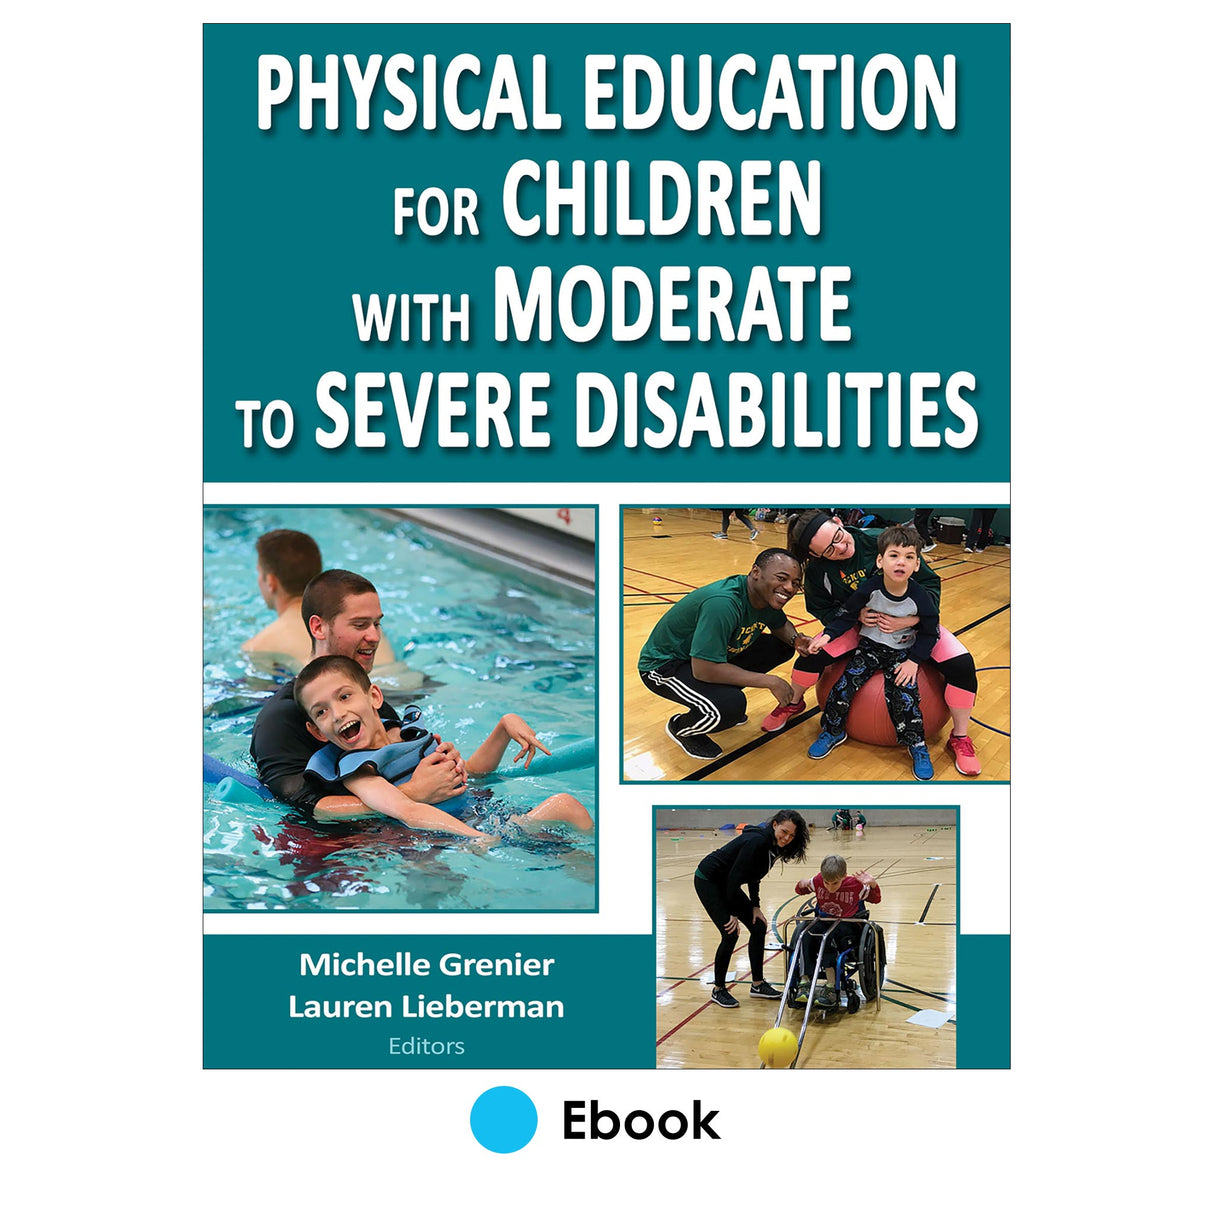 Physical Education for Children with Moderate to Severe Disabilities PDF